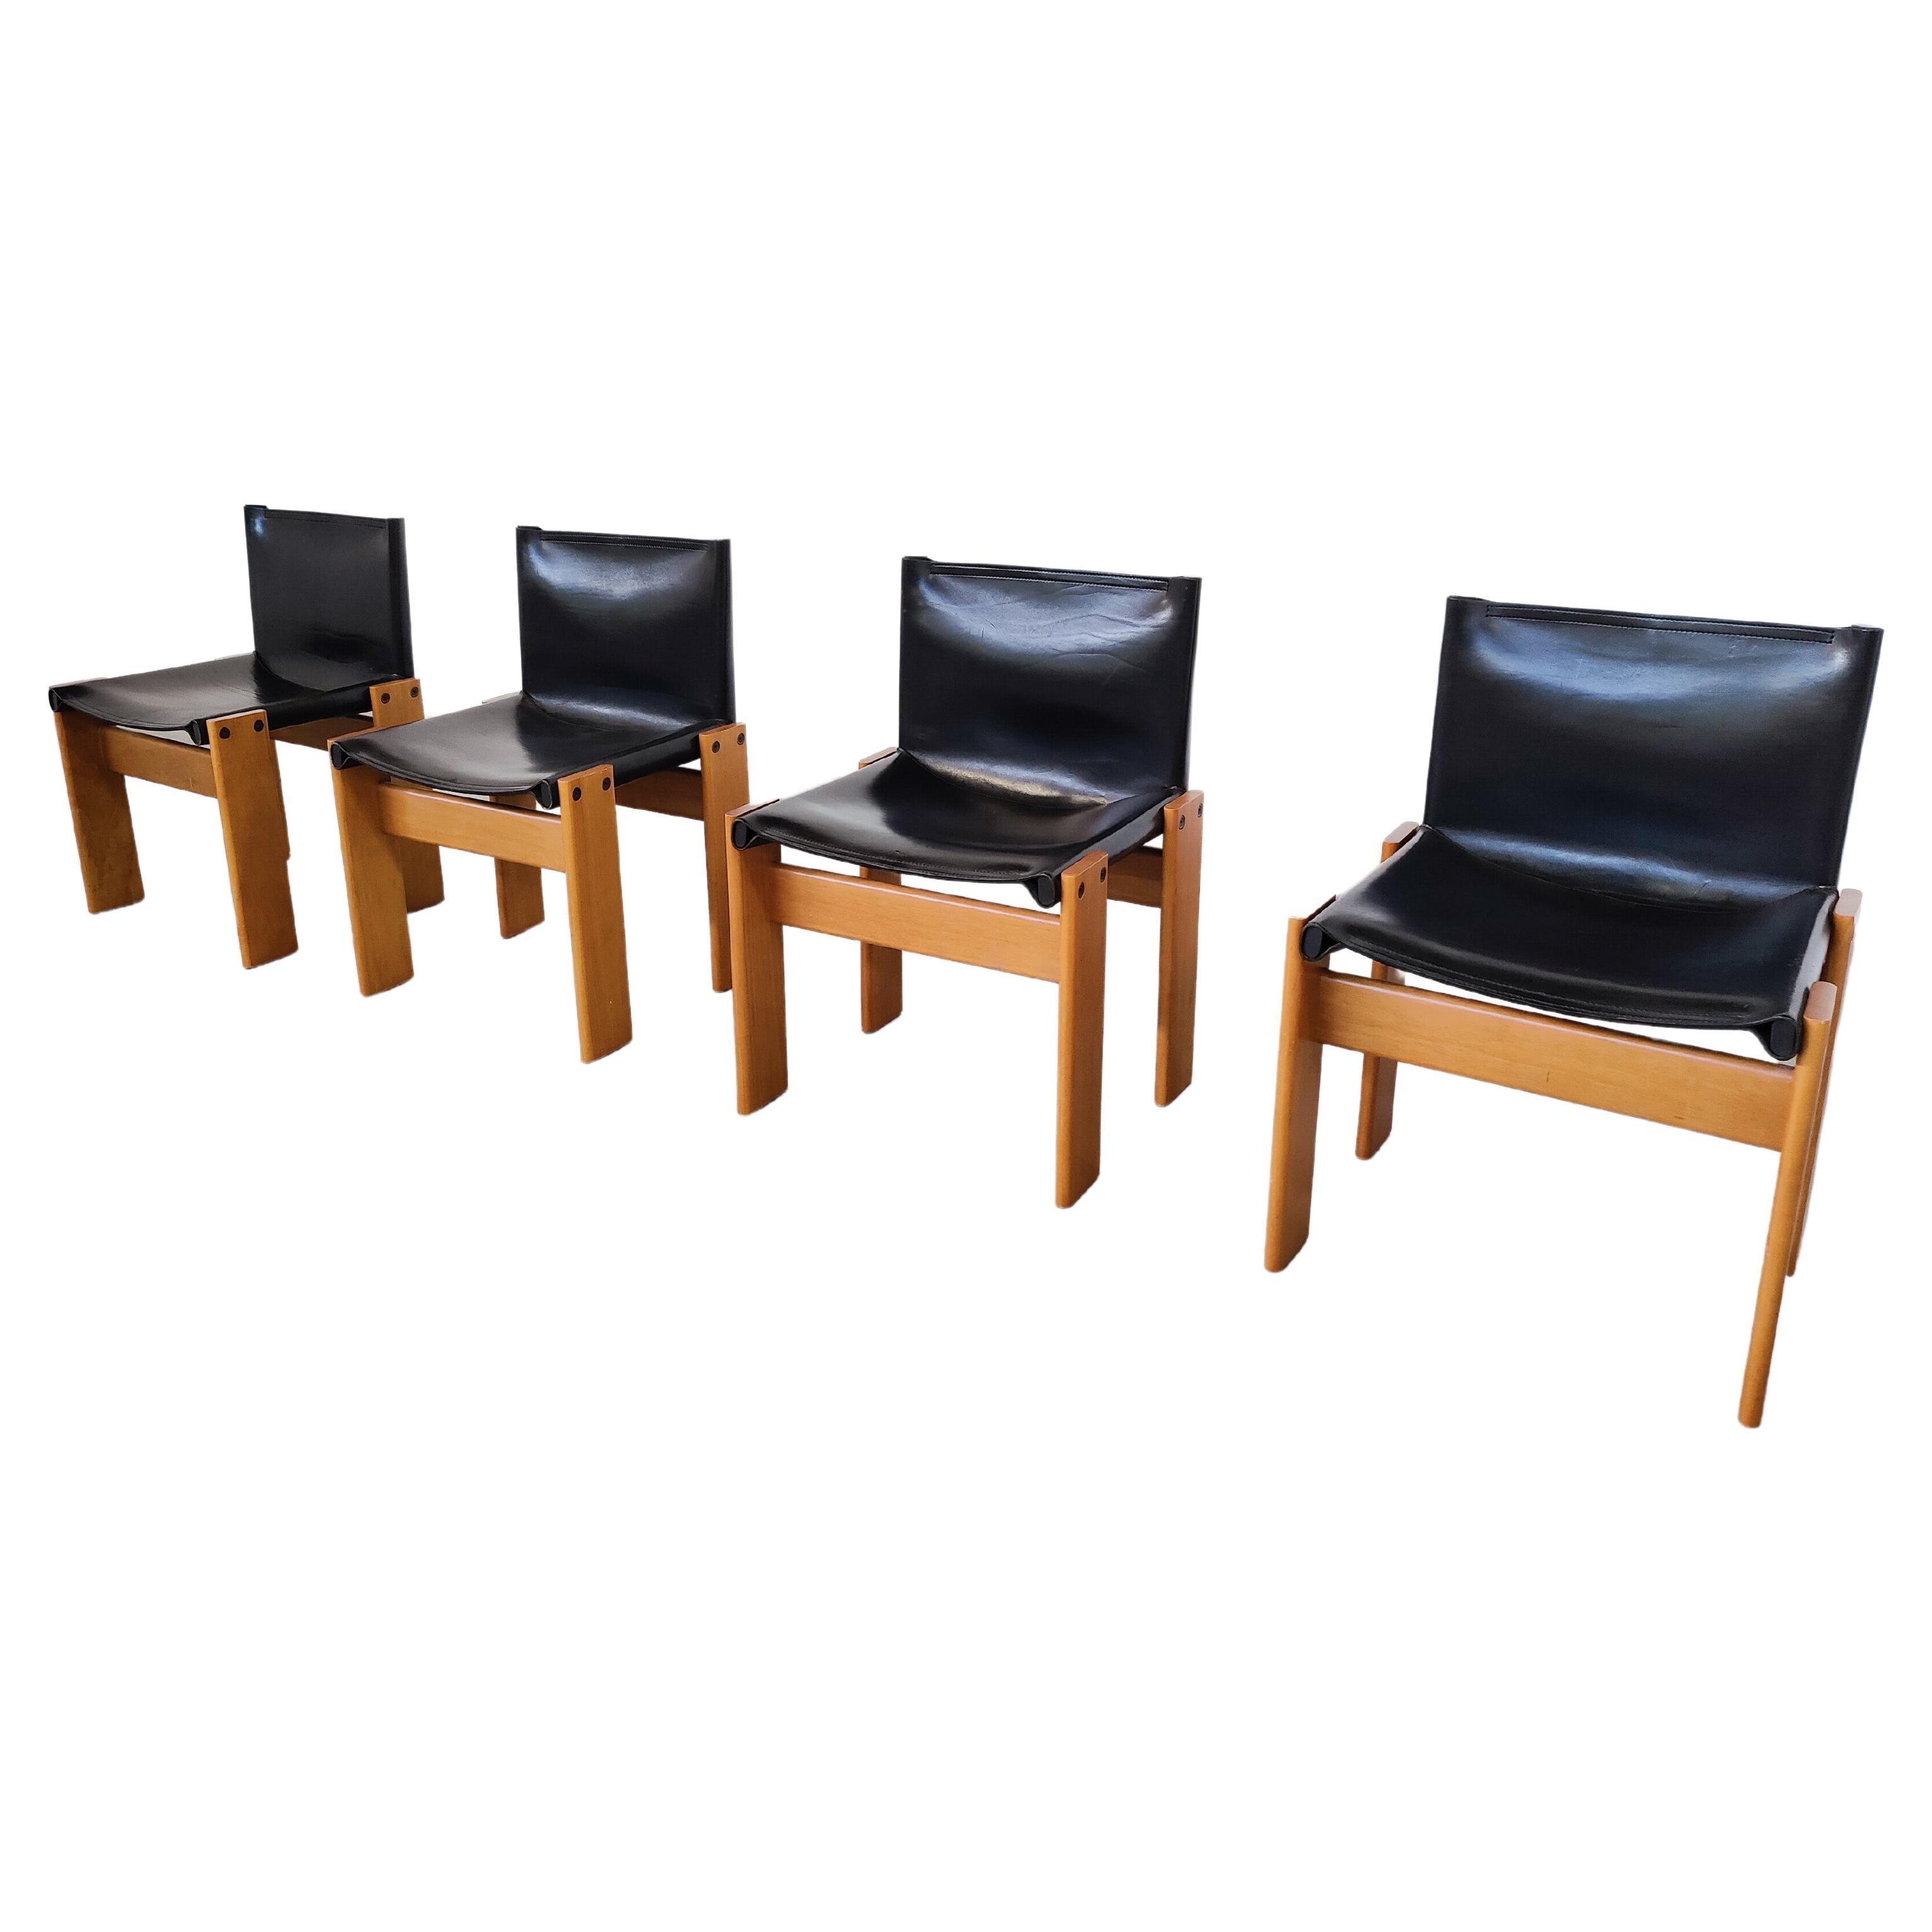 Set of 4 Black Leather Chairs Model "Monk" by Afra and Tobia Scarpa for Molteni For Sale